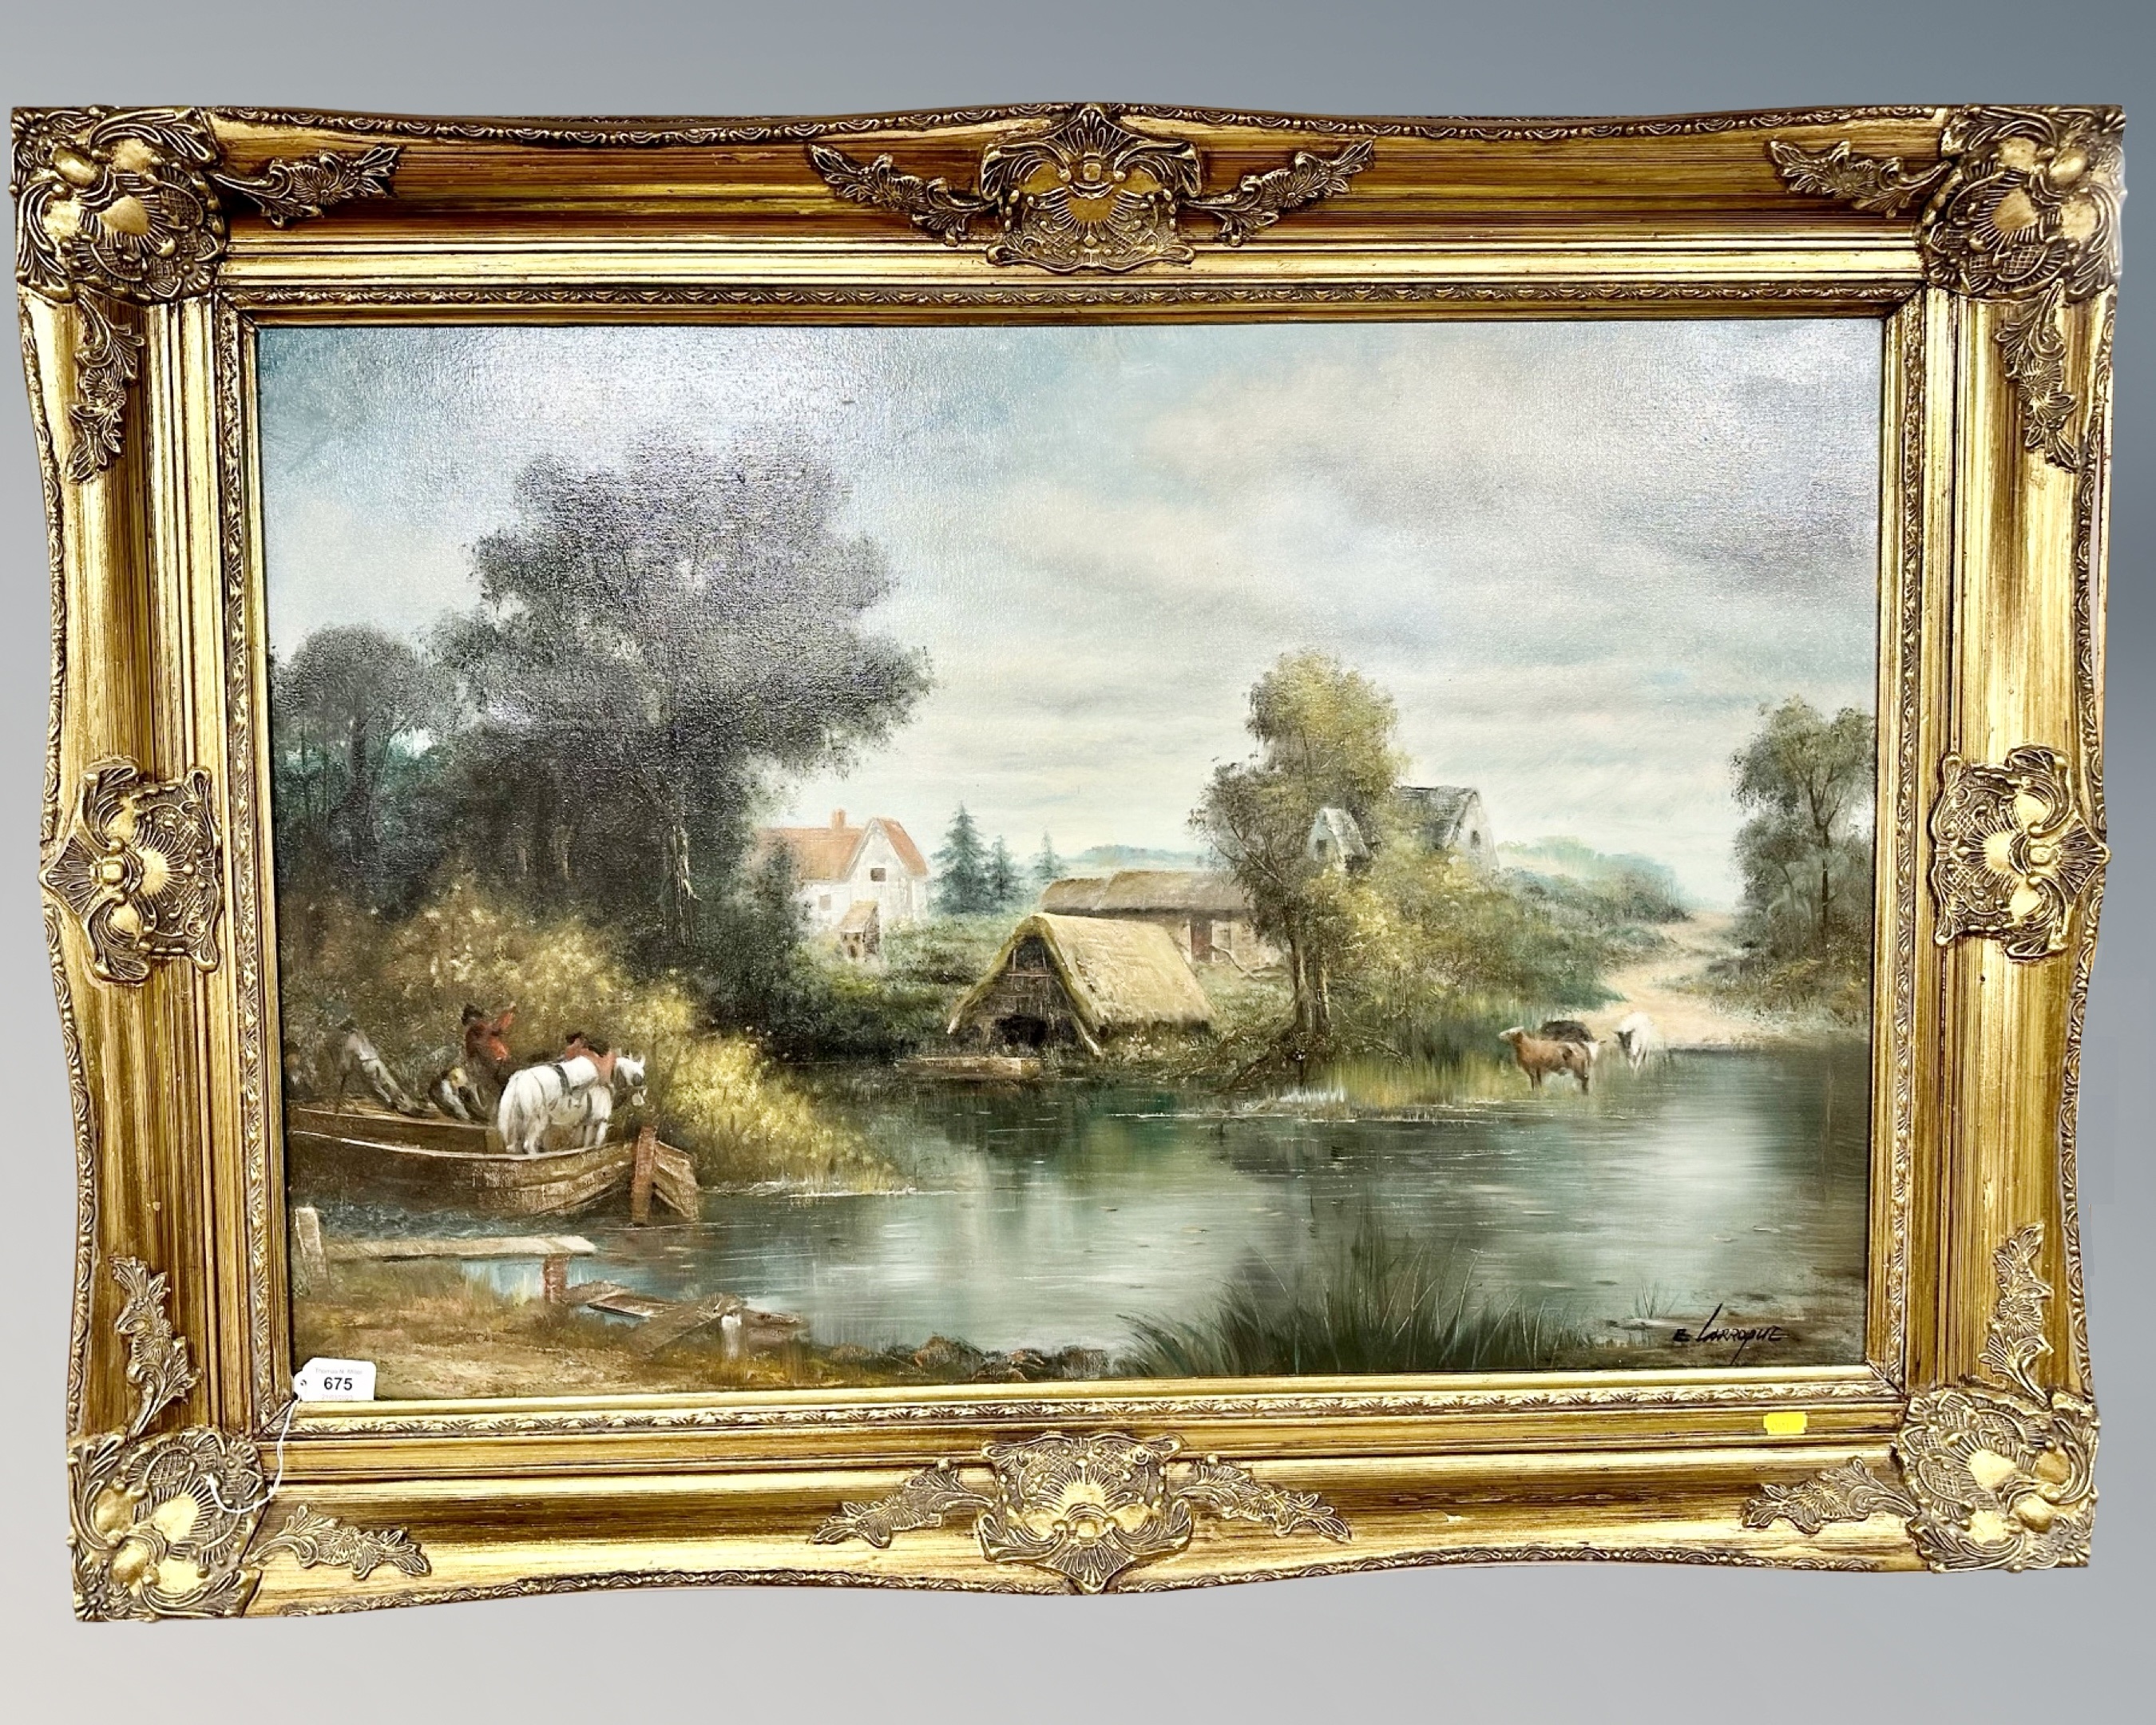 E. Larroque : Cattle watering by a ford, oil on canvas, 90cm by 60cm.